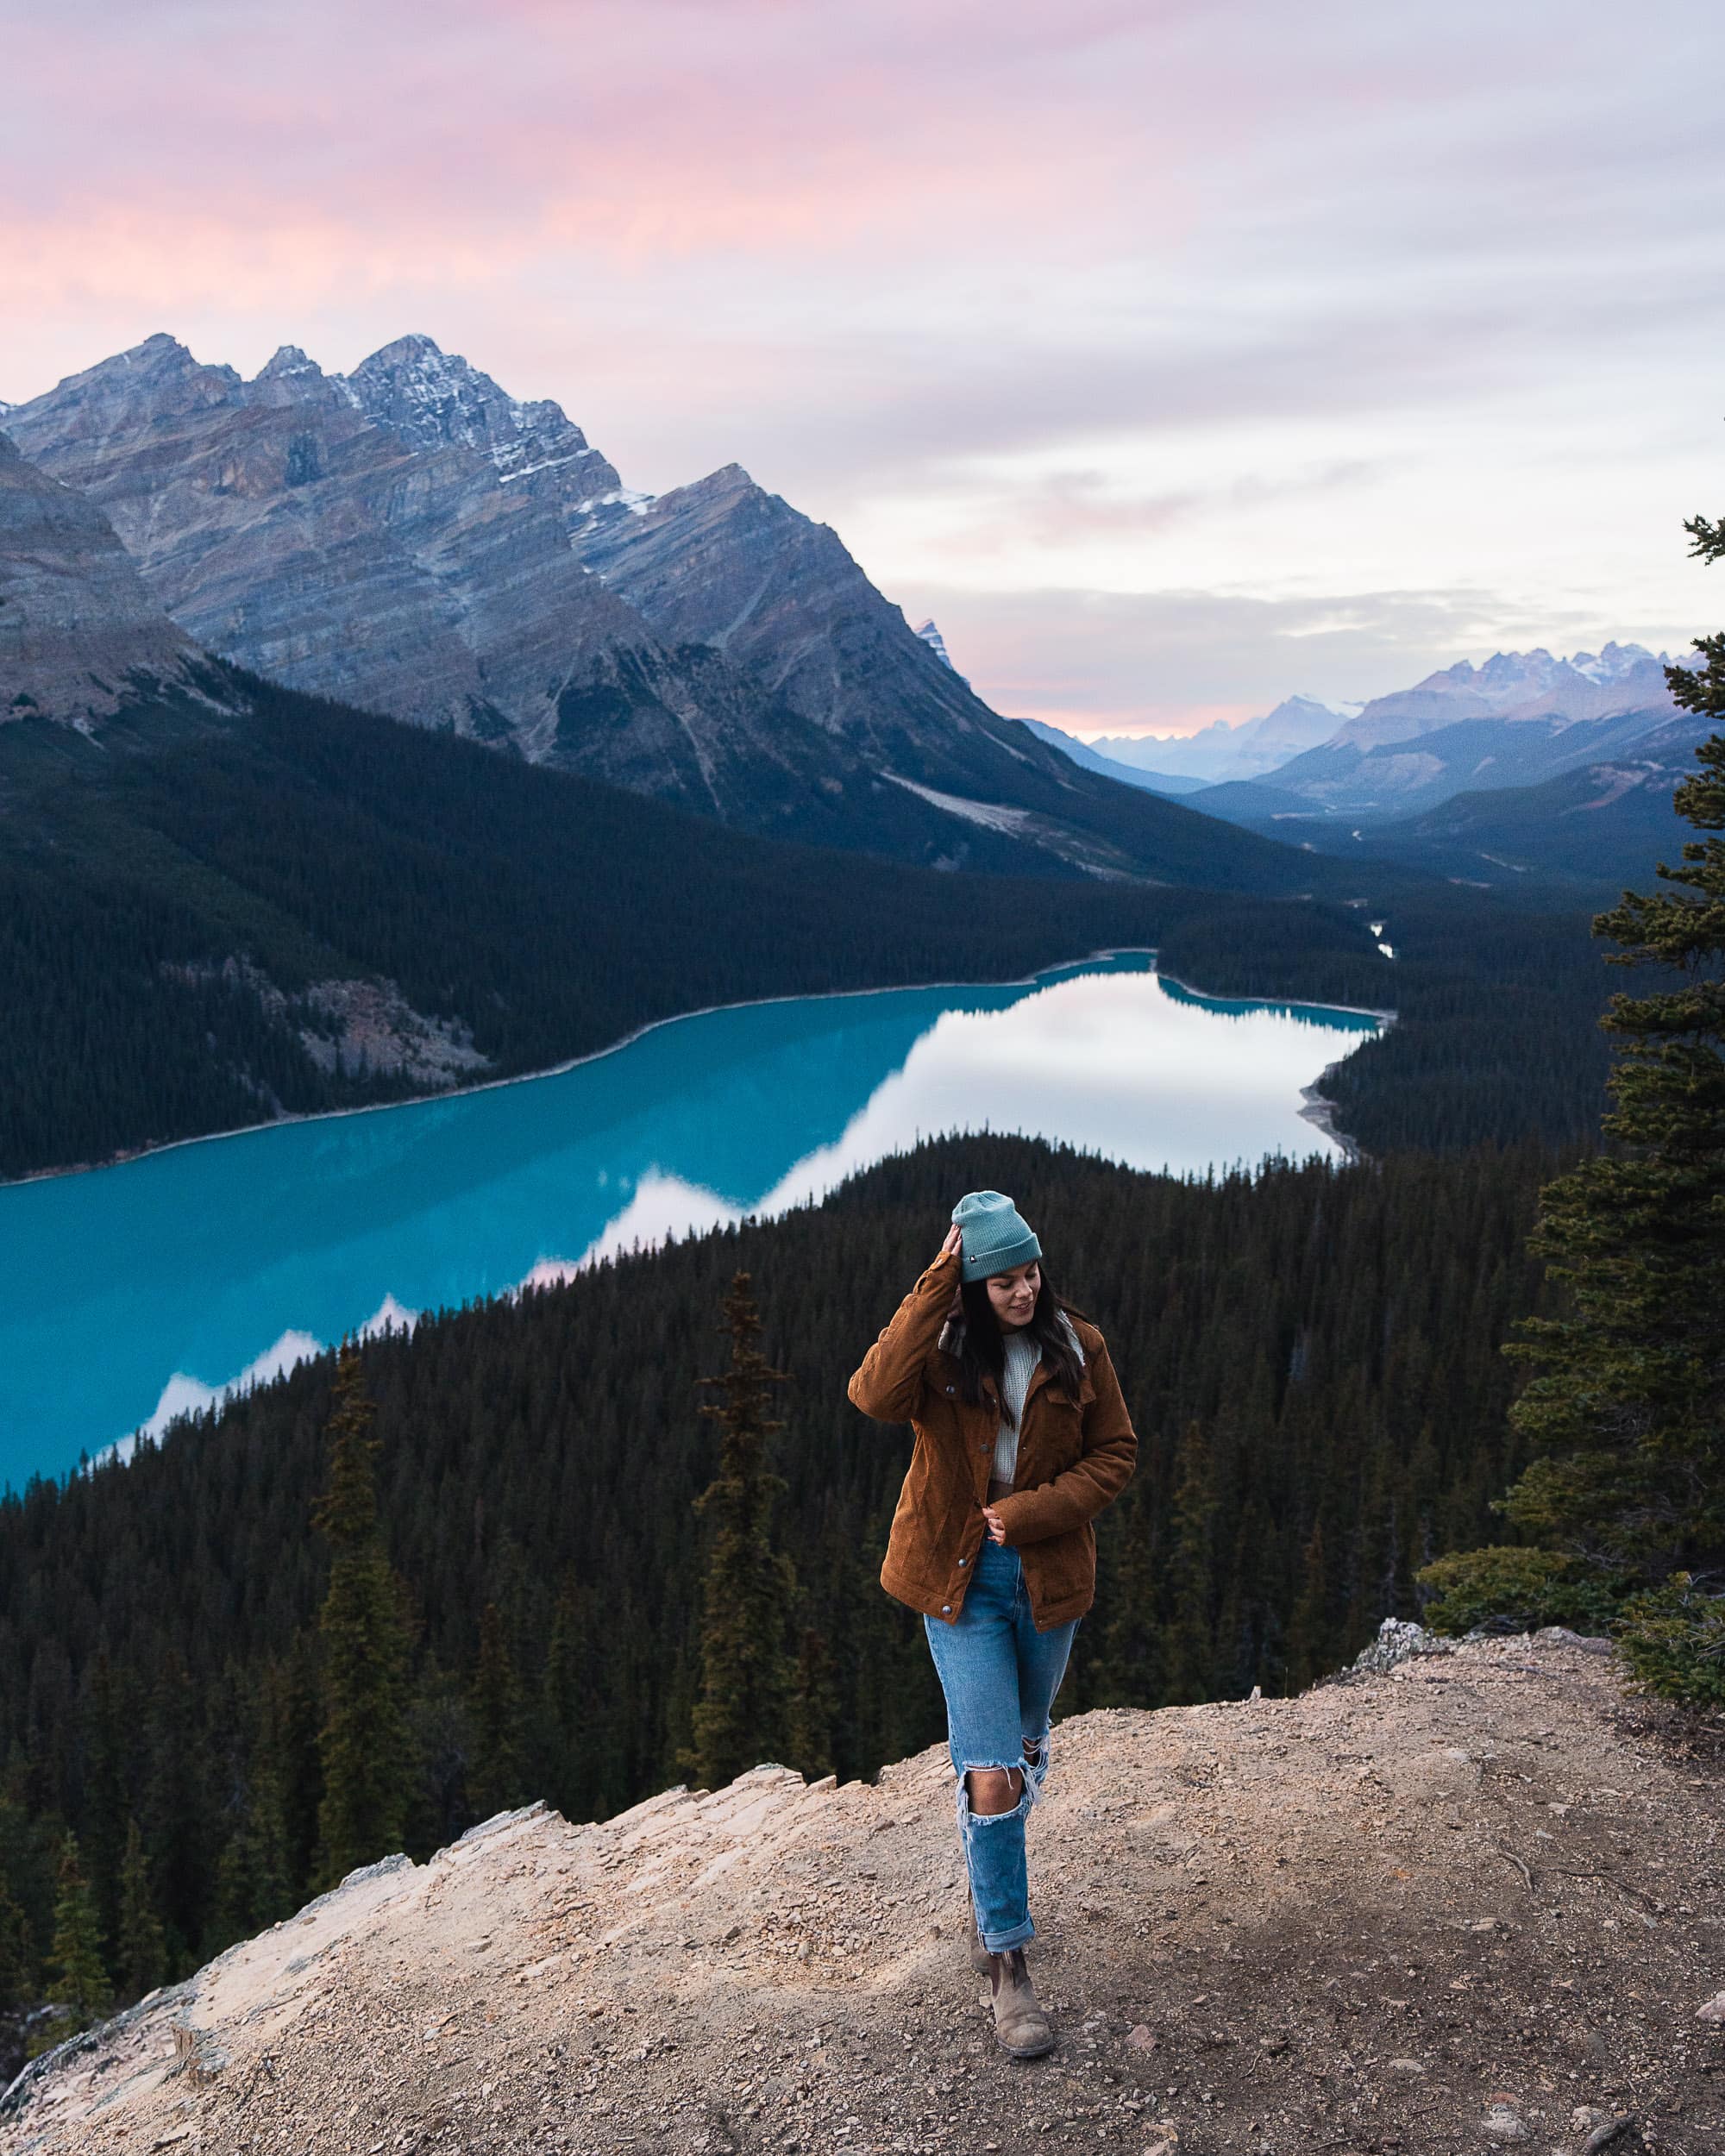 peyto lake is a beautiful blue alpine lake in banff national park a bucket list destination in banff